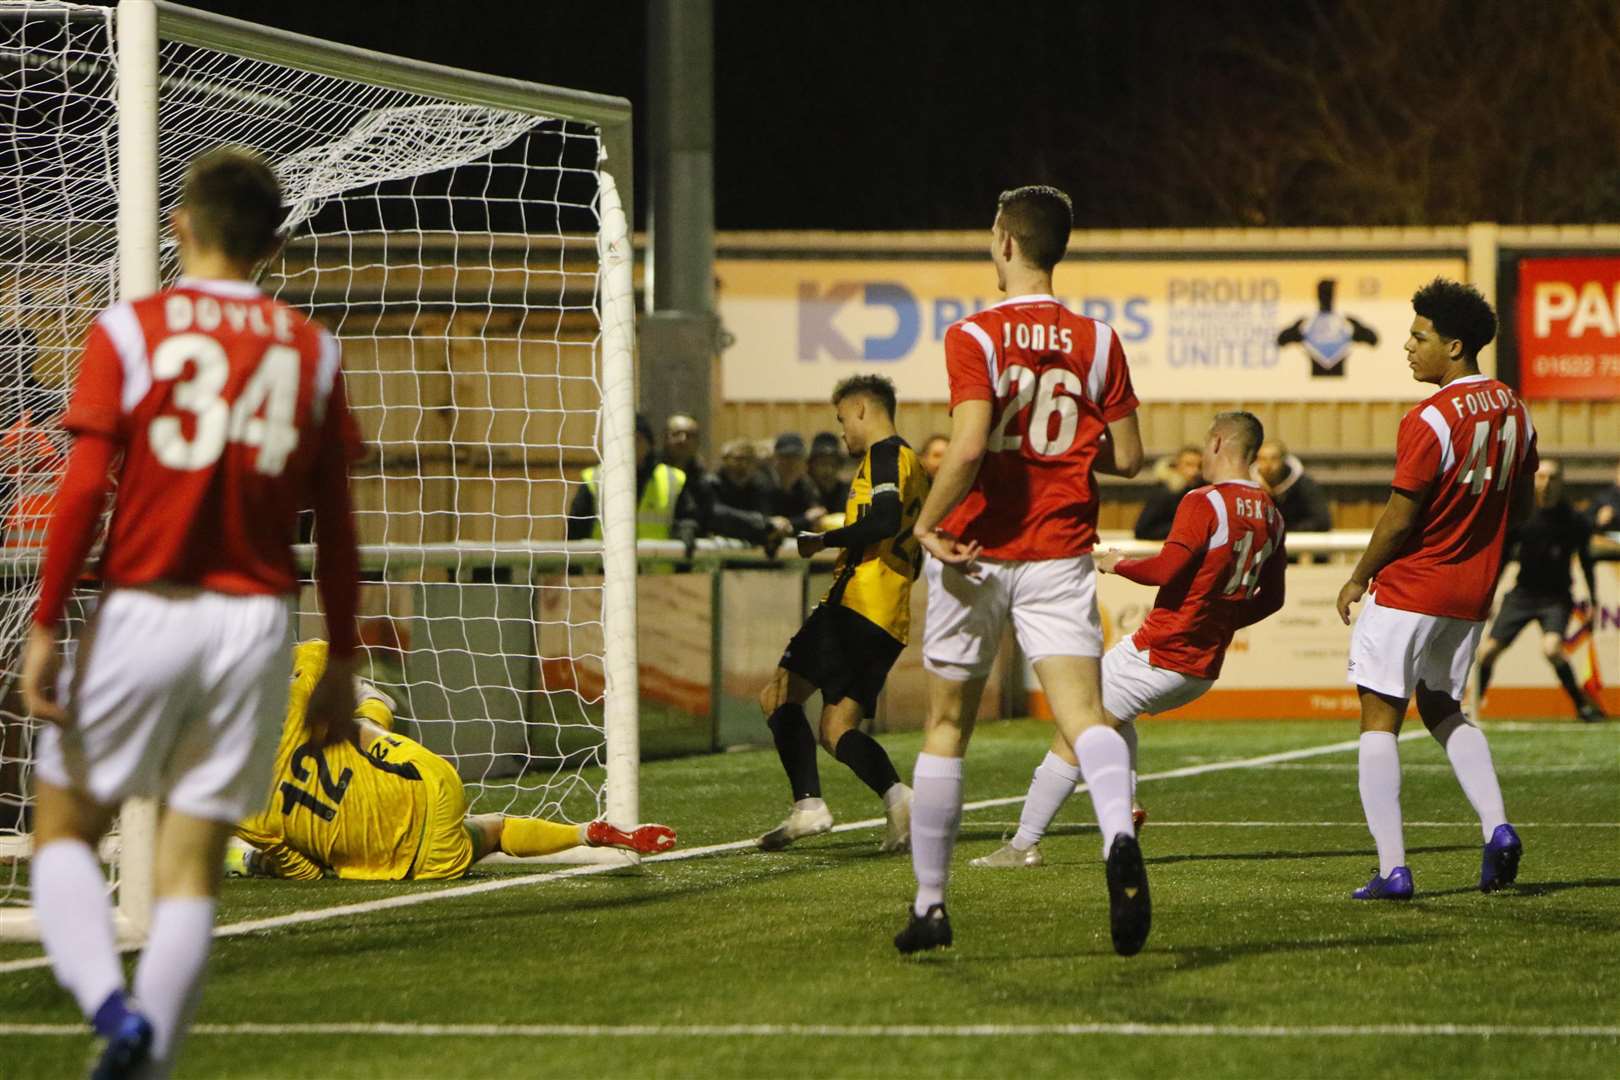 Michael Phillips gives Maidstone the lead against Salford Picture: Andy Jones